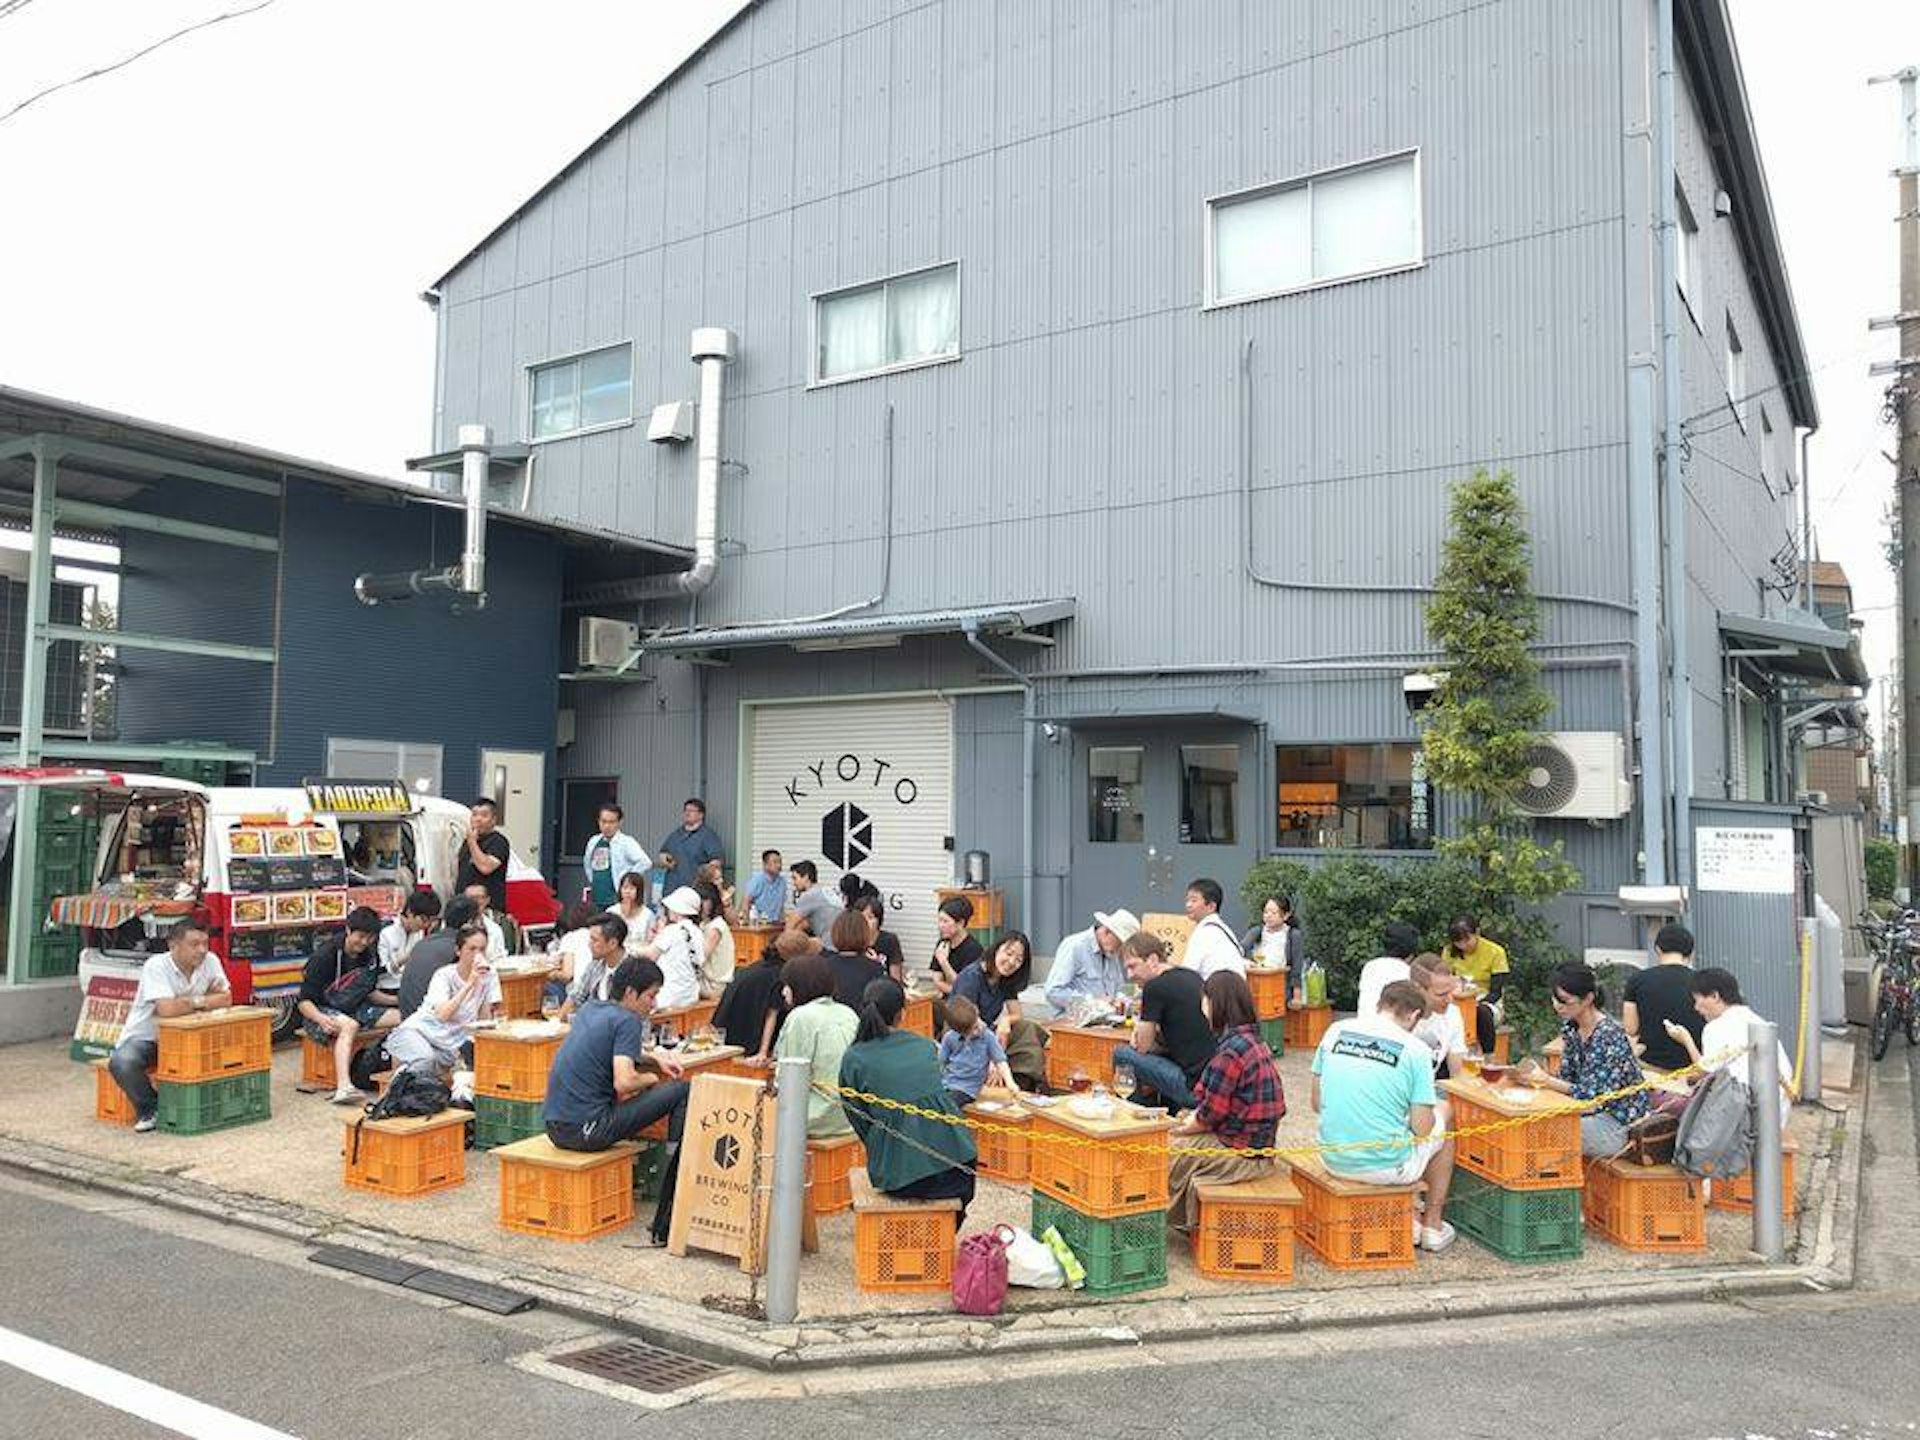 A patio with plastic crates for chairs and tables is full of patrons enjoying their beers and chatting with one another against the backdrop of a grey corrugated metal building